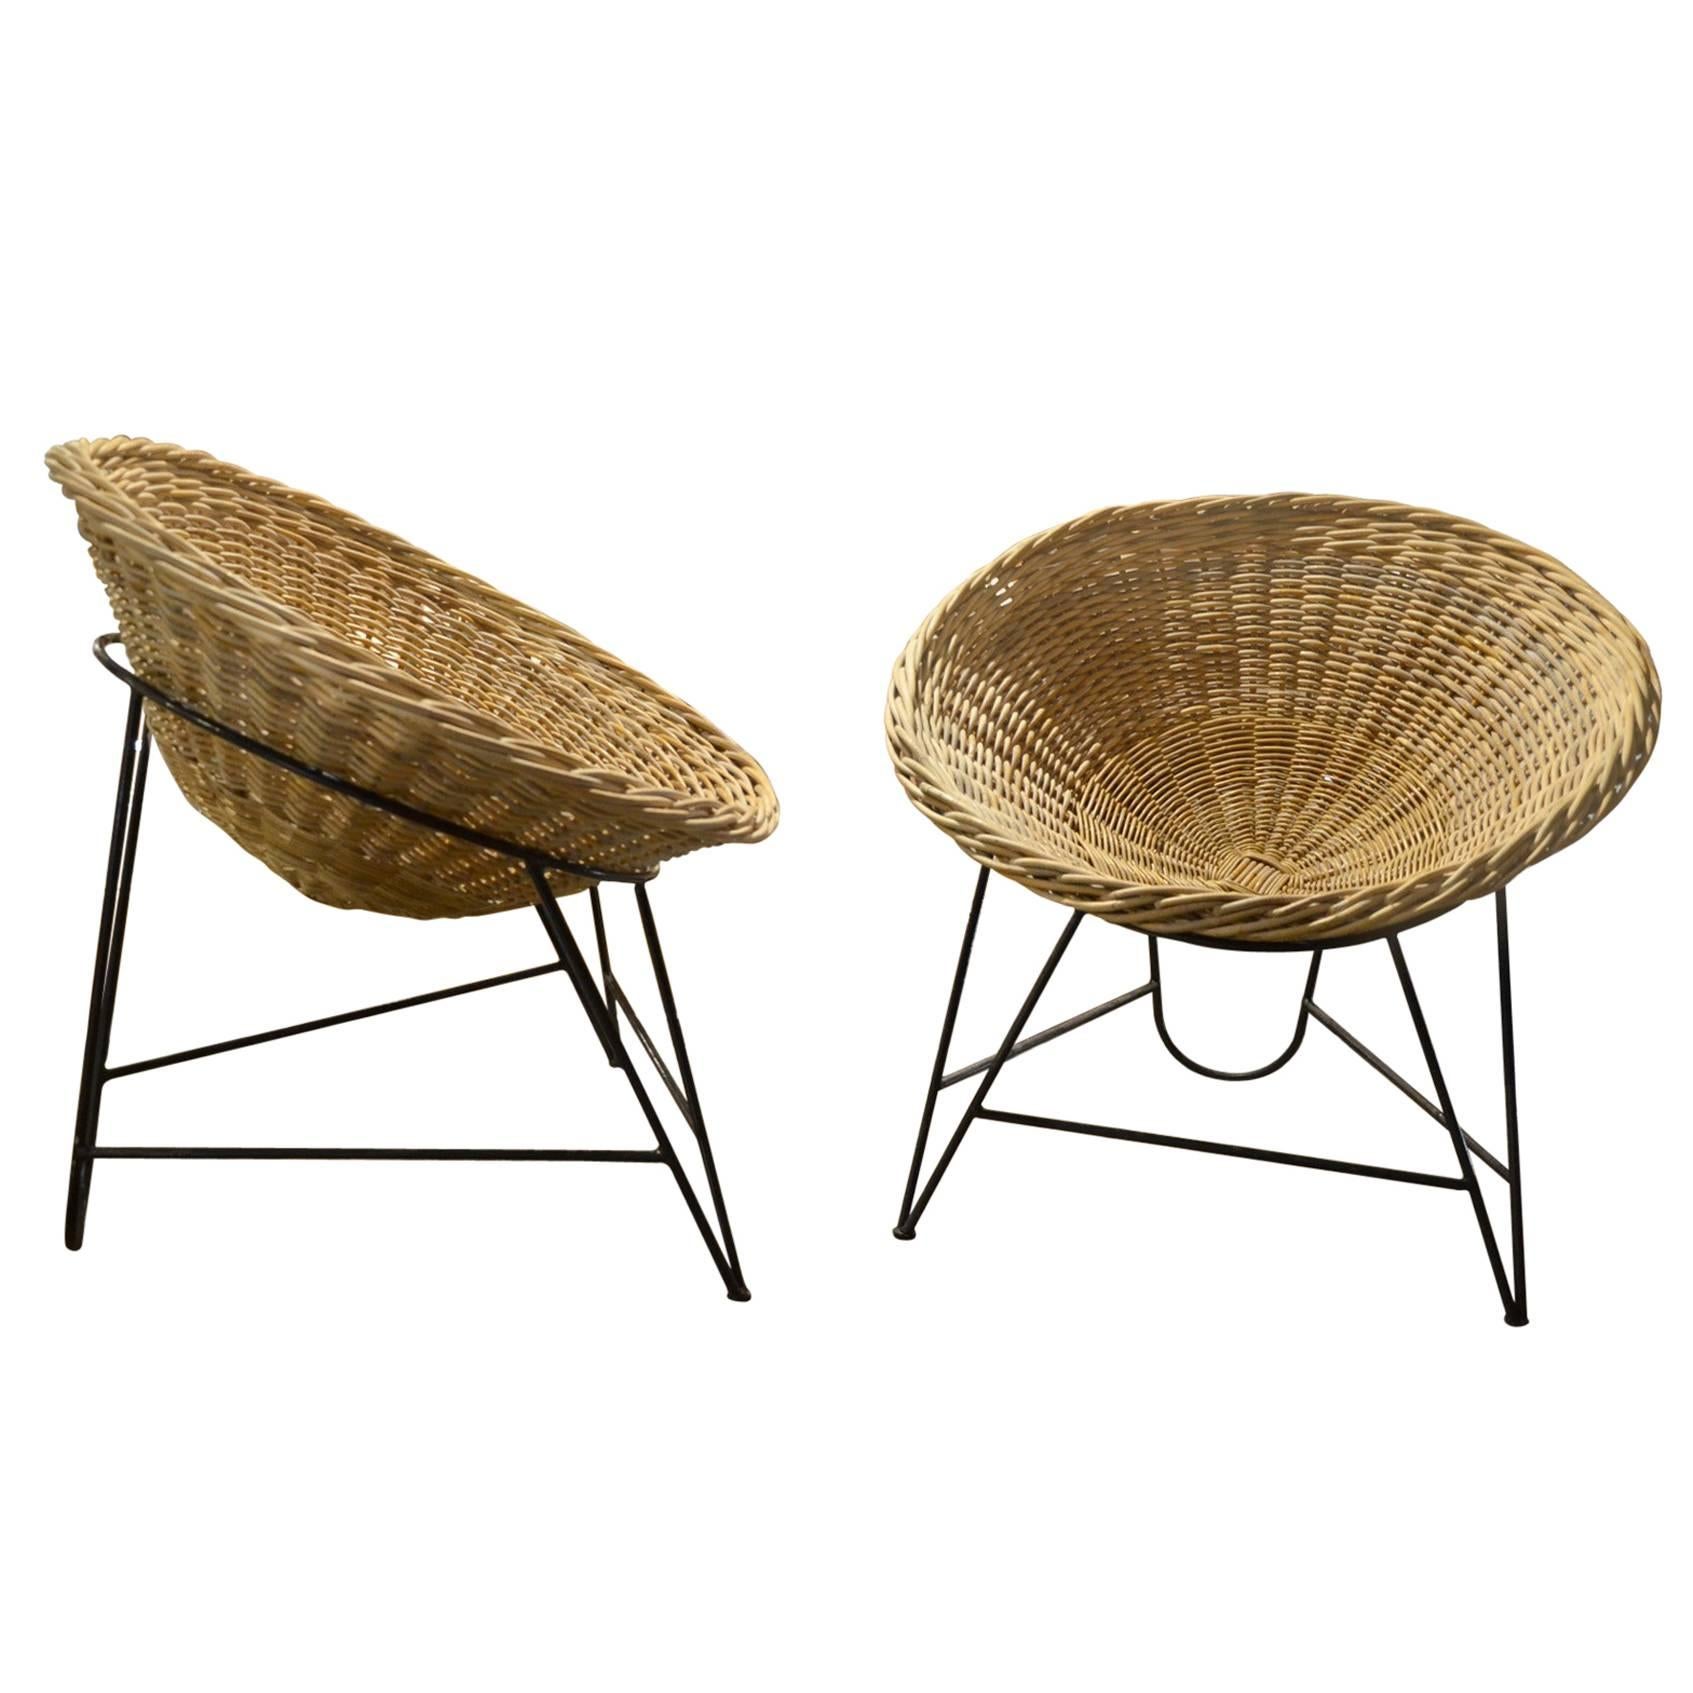 Beautiful Pair of Janine Abraham Wicker Armchairs, circa 1960 For Sale